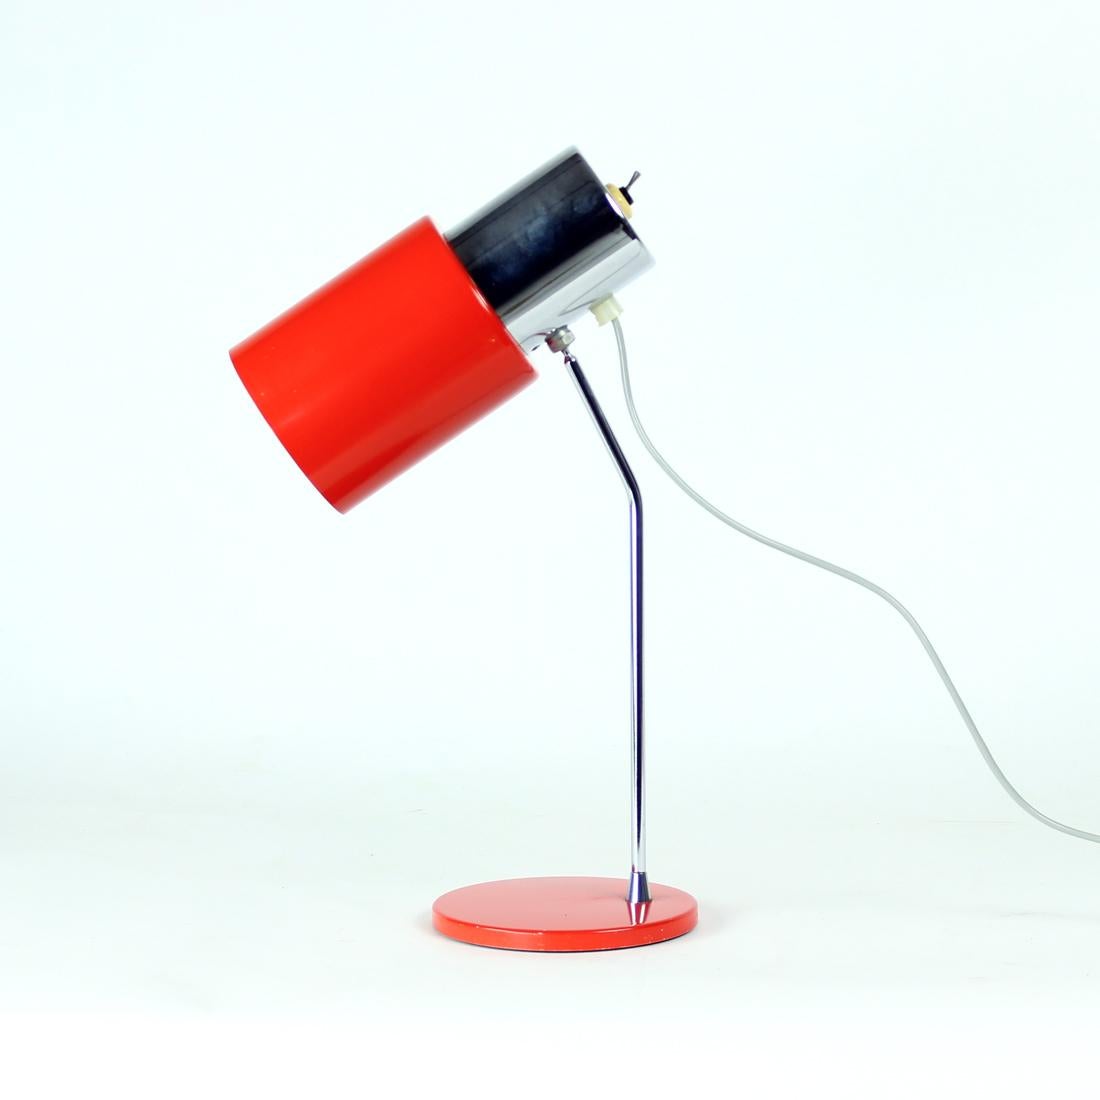 Beautiful table lamp produced in the Mid-Century Modern design period. Designed by Josef Hurka for Napako company. Produced in 1960s. Light, elegant design with metal base and shield in bright red color. The constructruction is made of a chrome rod